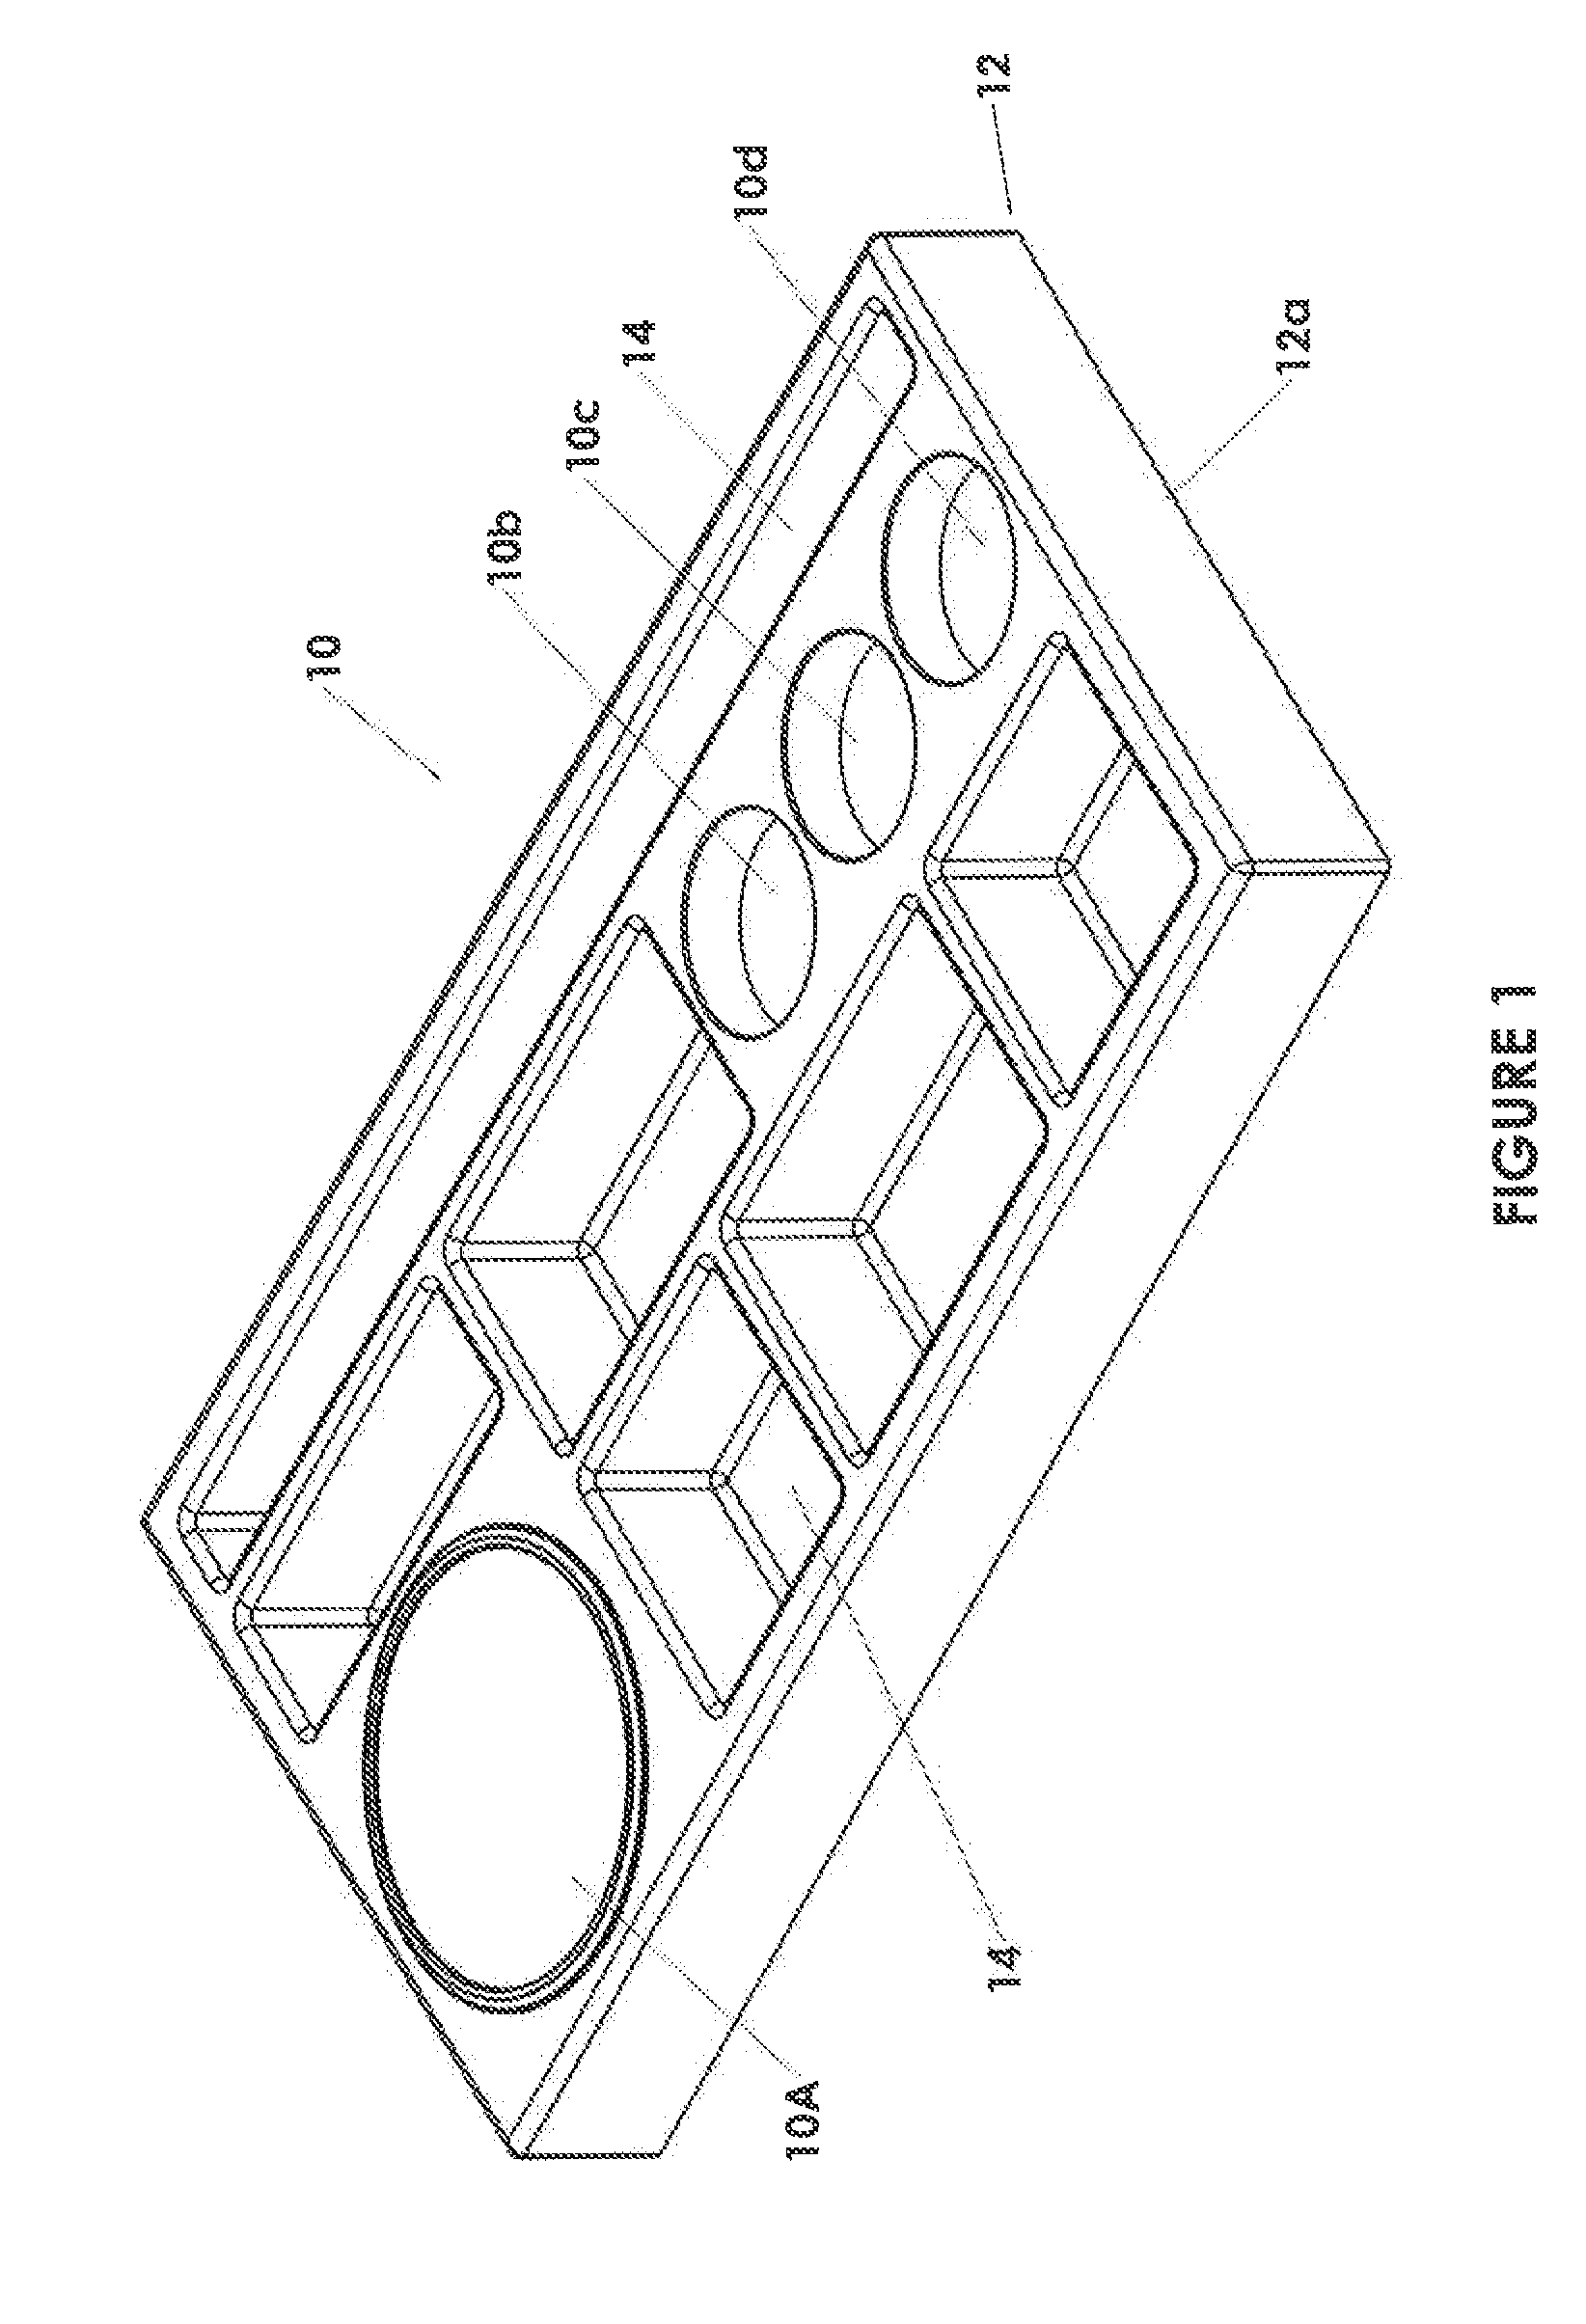 Systems and methods for enhancing preparation and completion of surgical and medical procedures